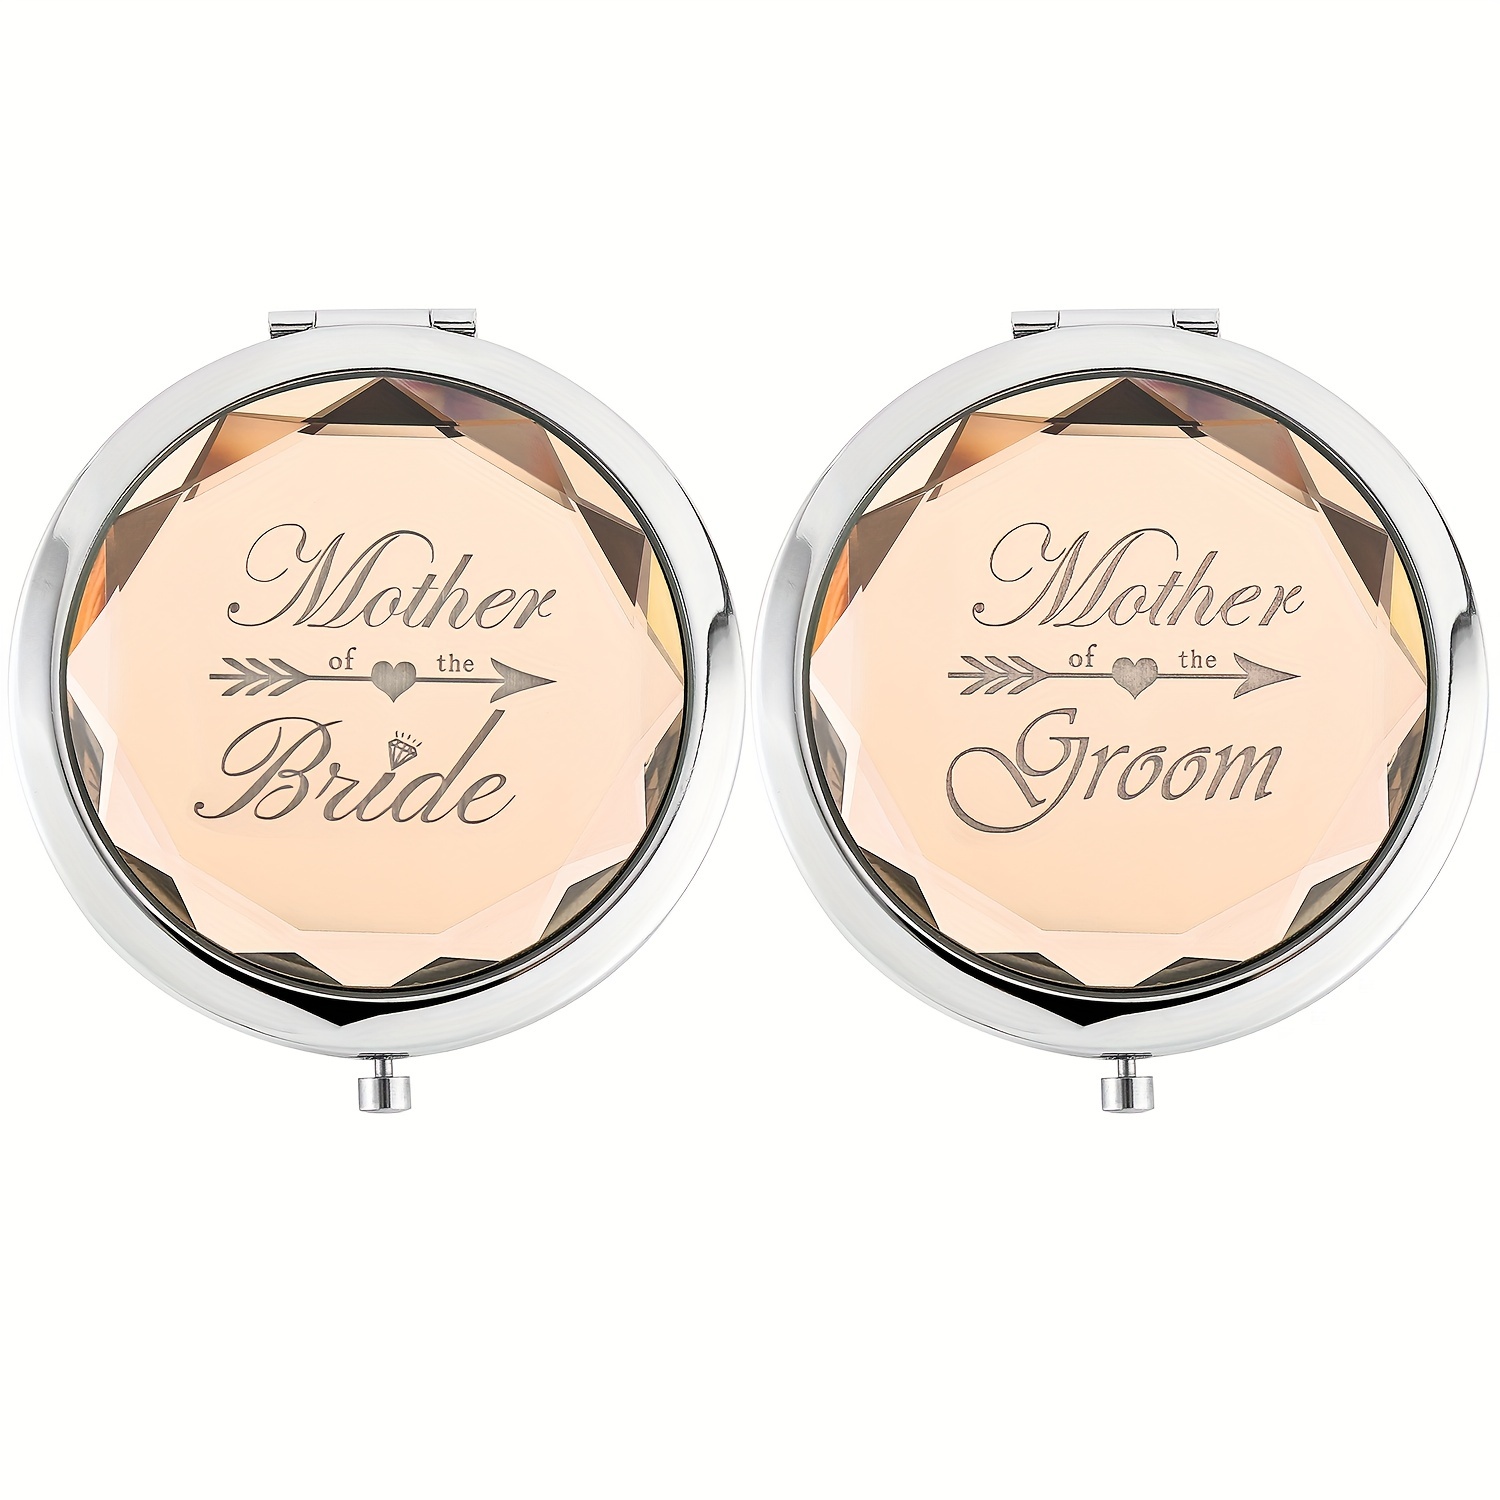 

2pcs Portable Foldable Makeup Mirror With Stainless Steel Frame For Mother Of The Bride And Mother Of The Groom, Wedding Party Gift - Mother's Day Makeup Mirror